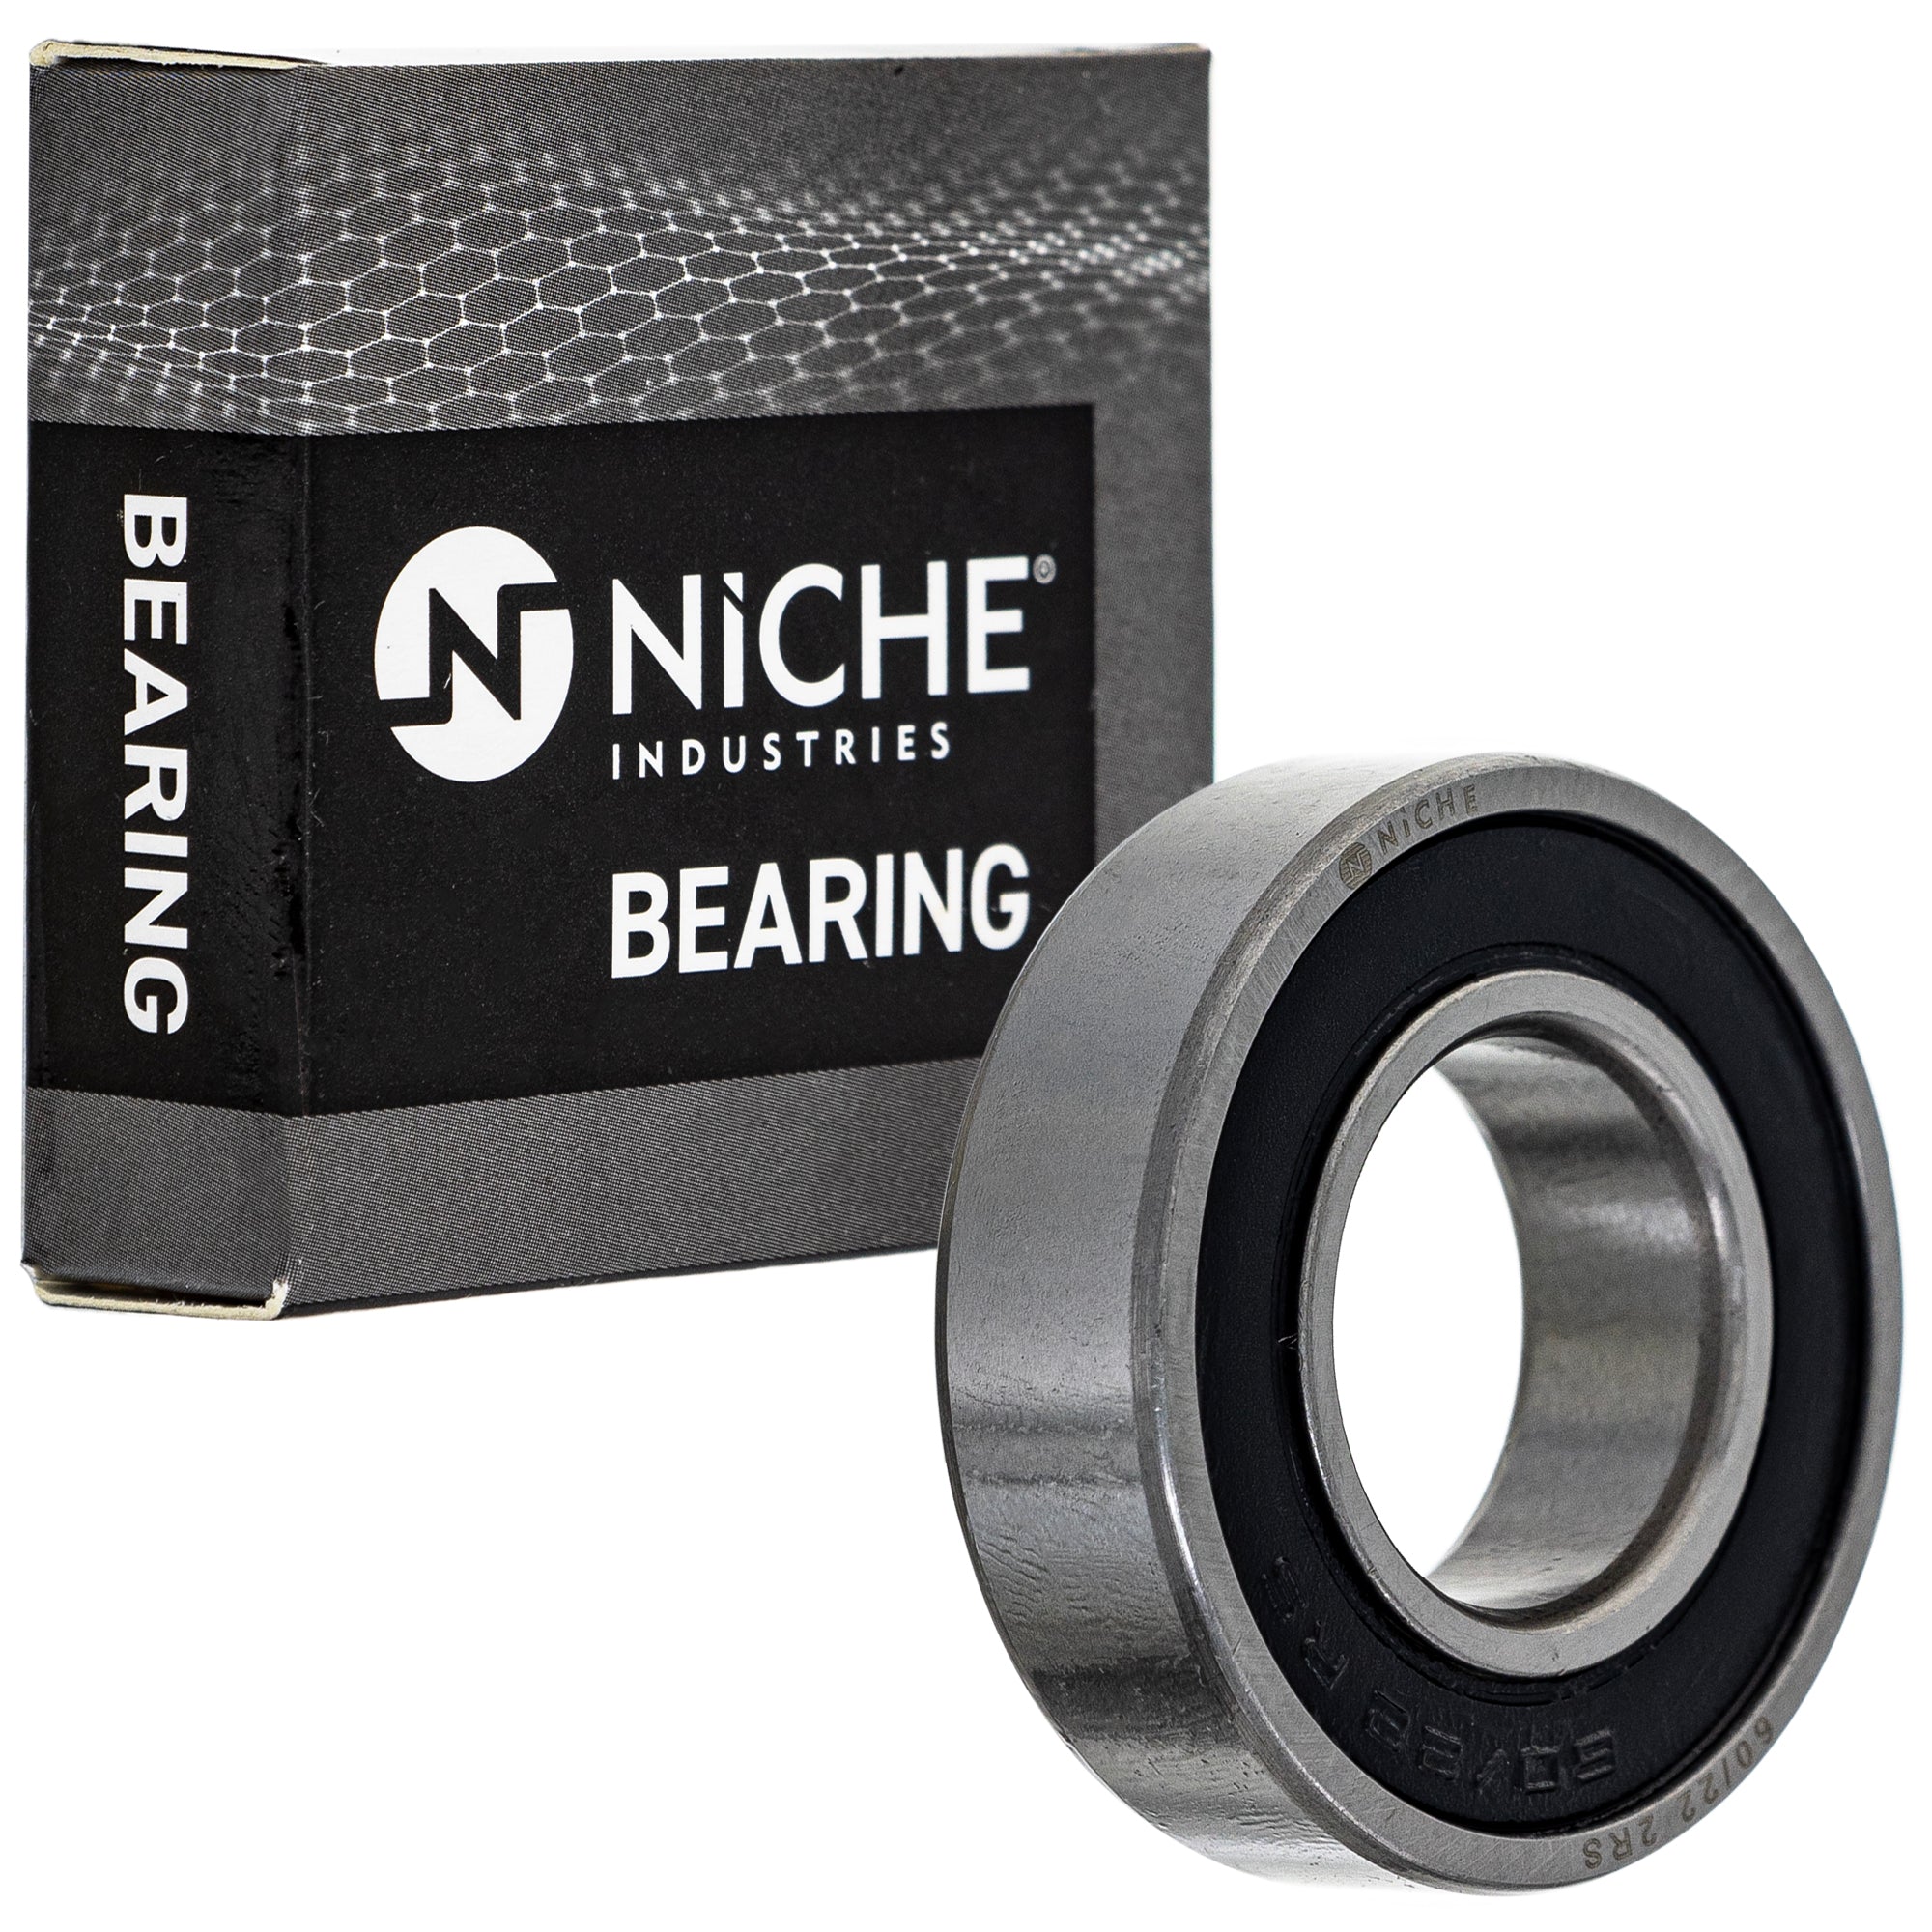 NICHE 519-CBB2267R Bearing & Seal Kit 2-Pack for zOTHER TRX700XX